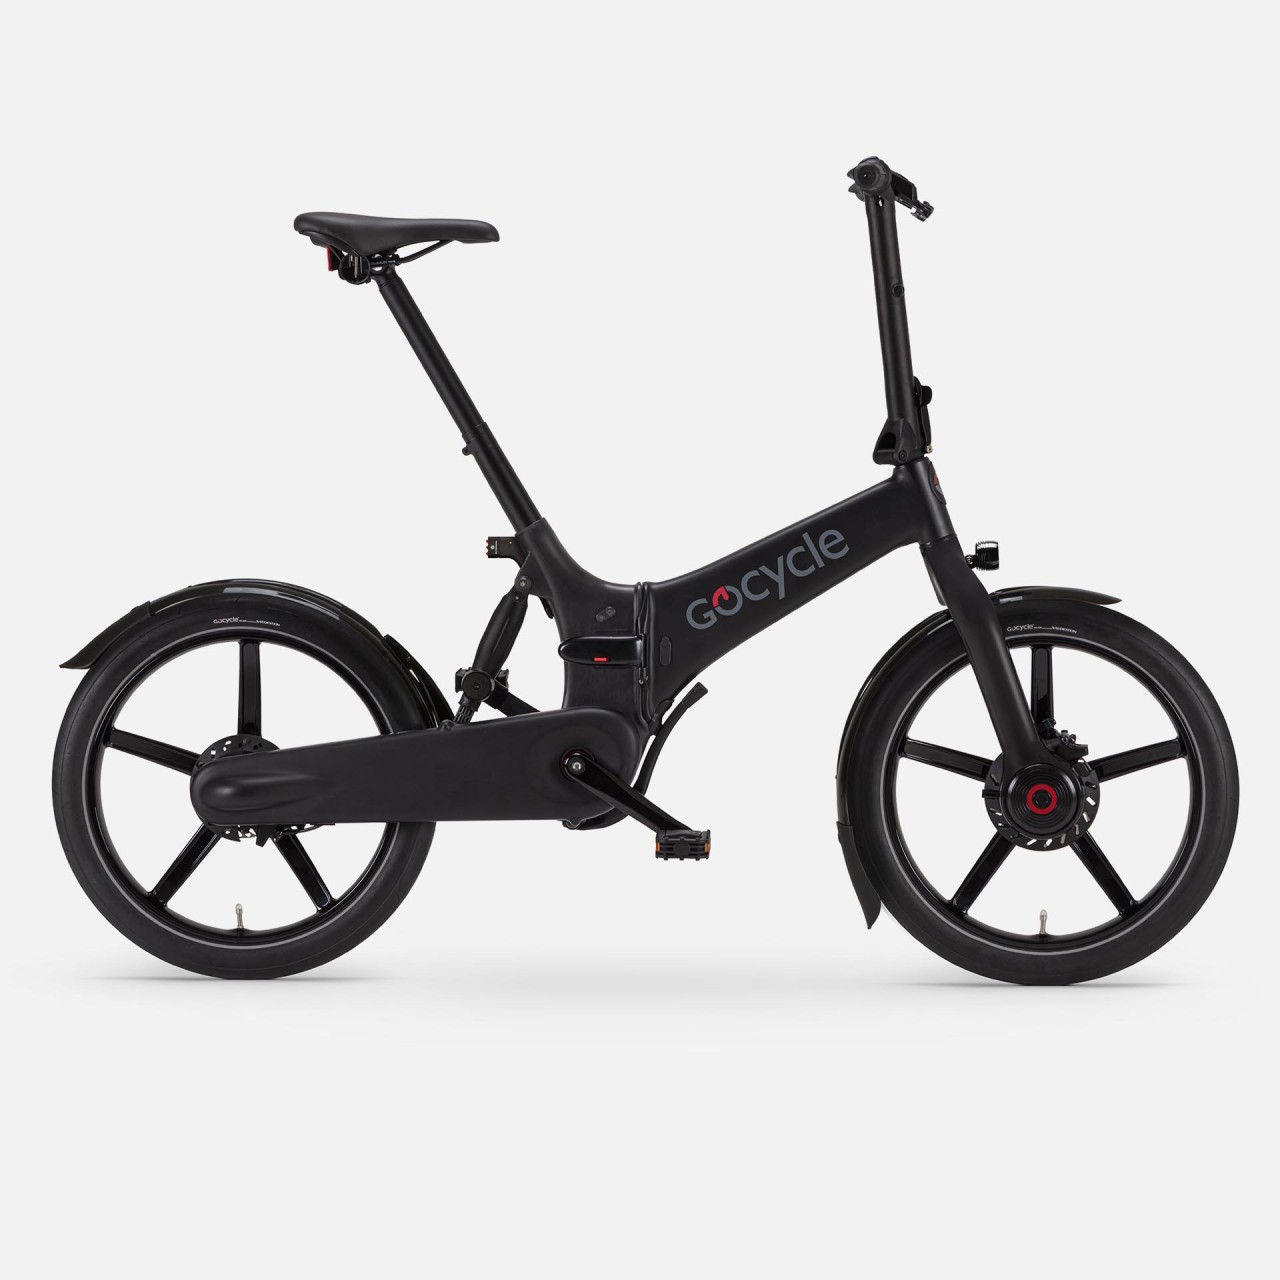 Gocycle G4 2022 eBike Carbon